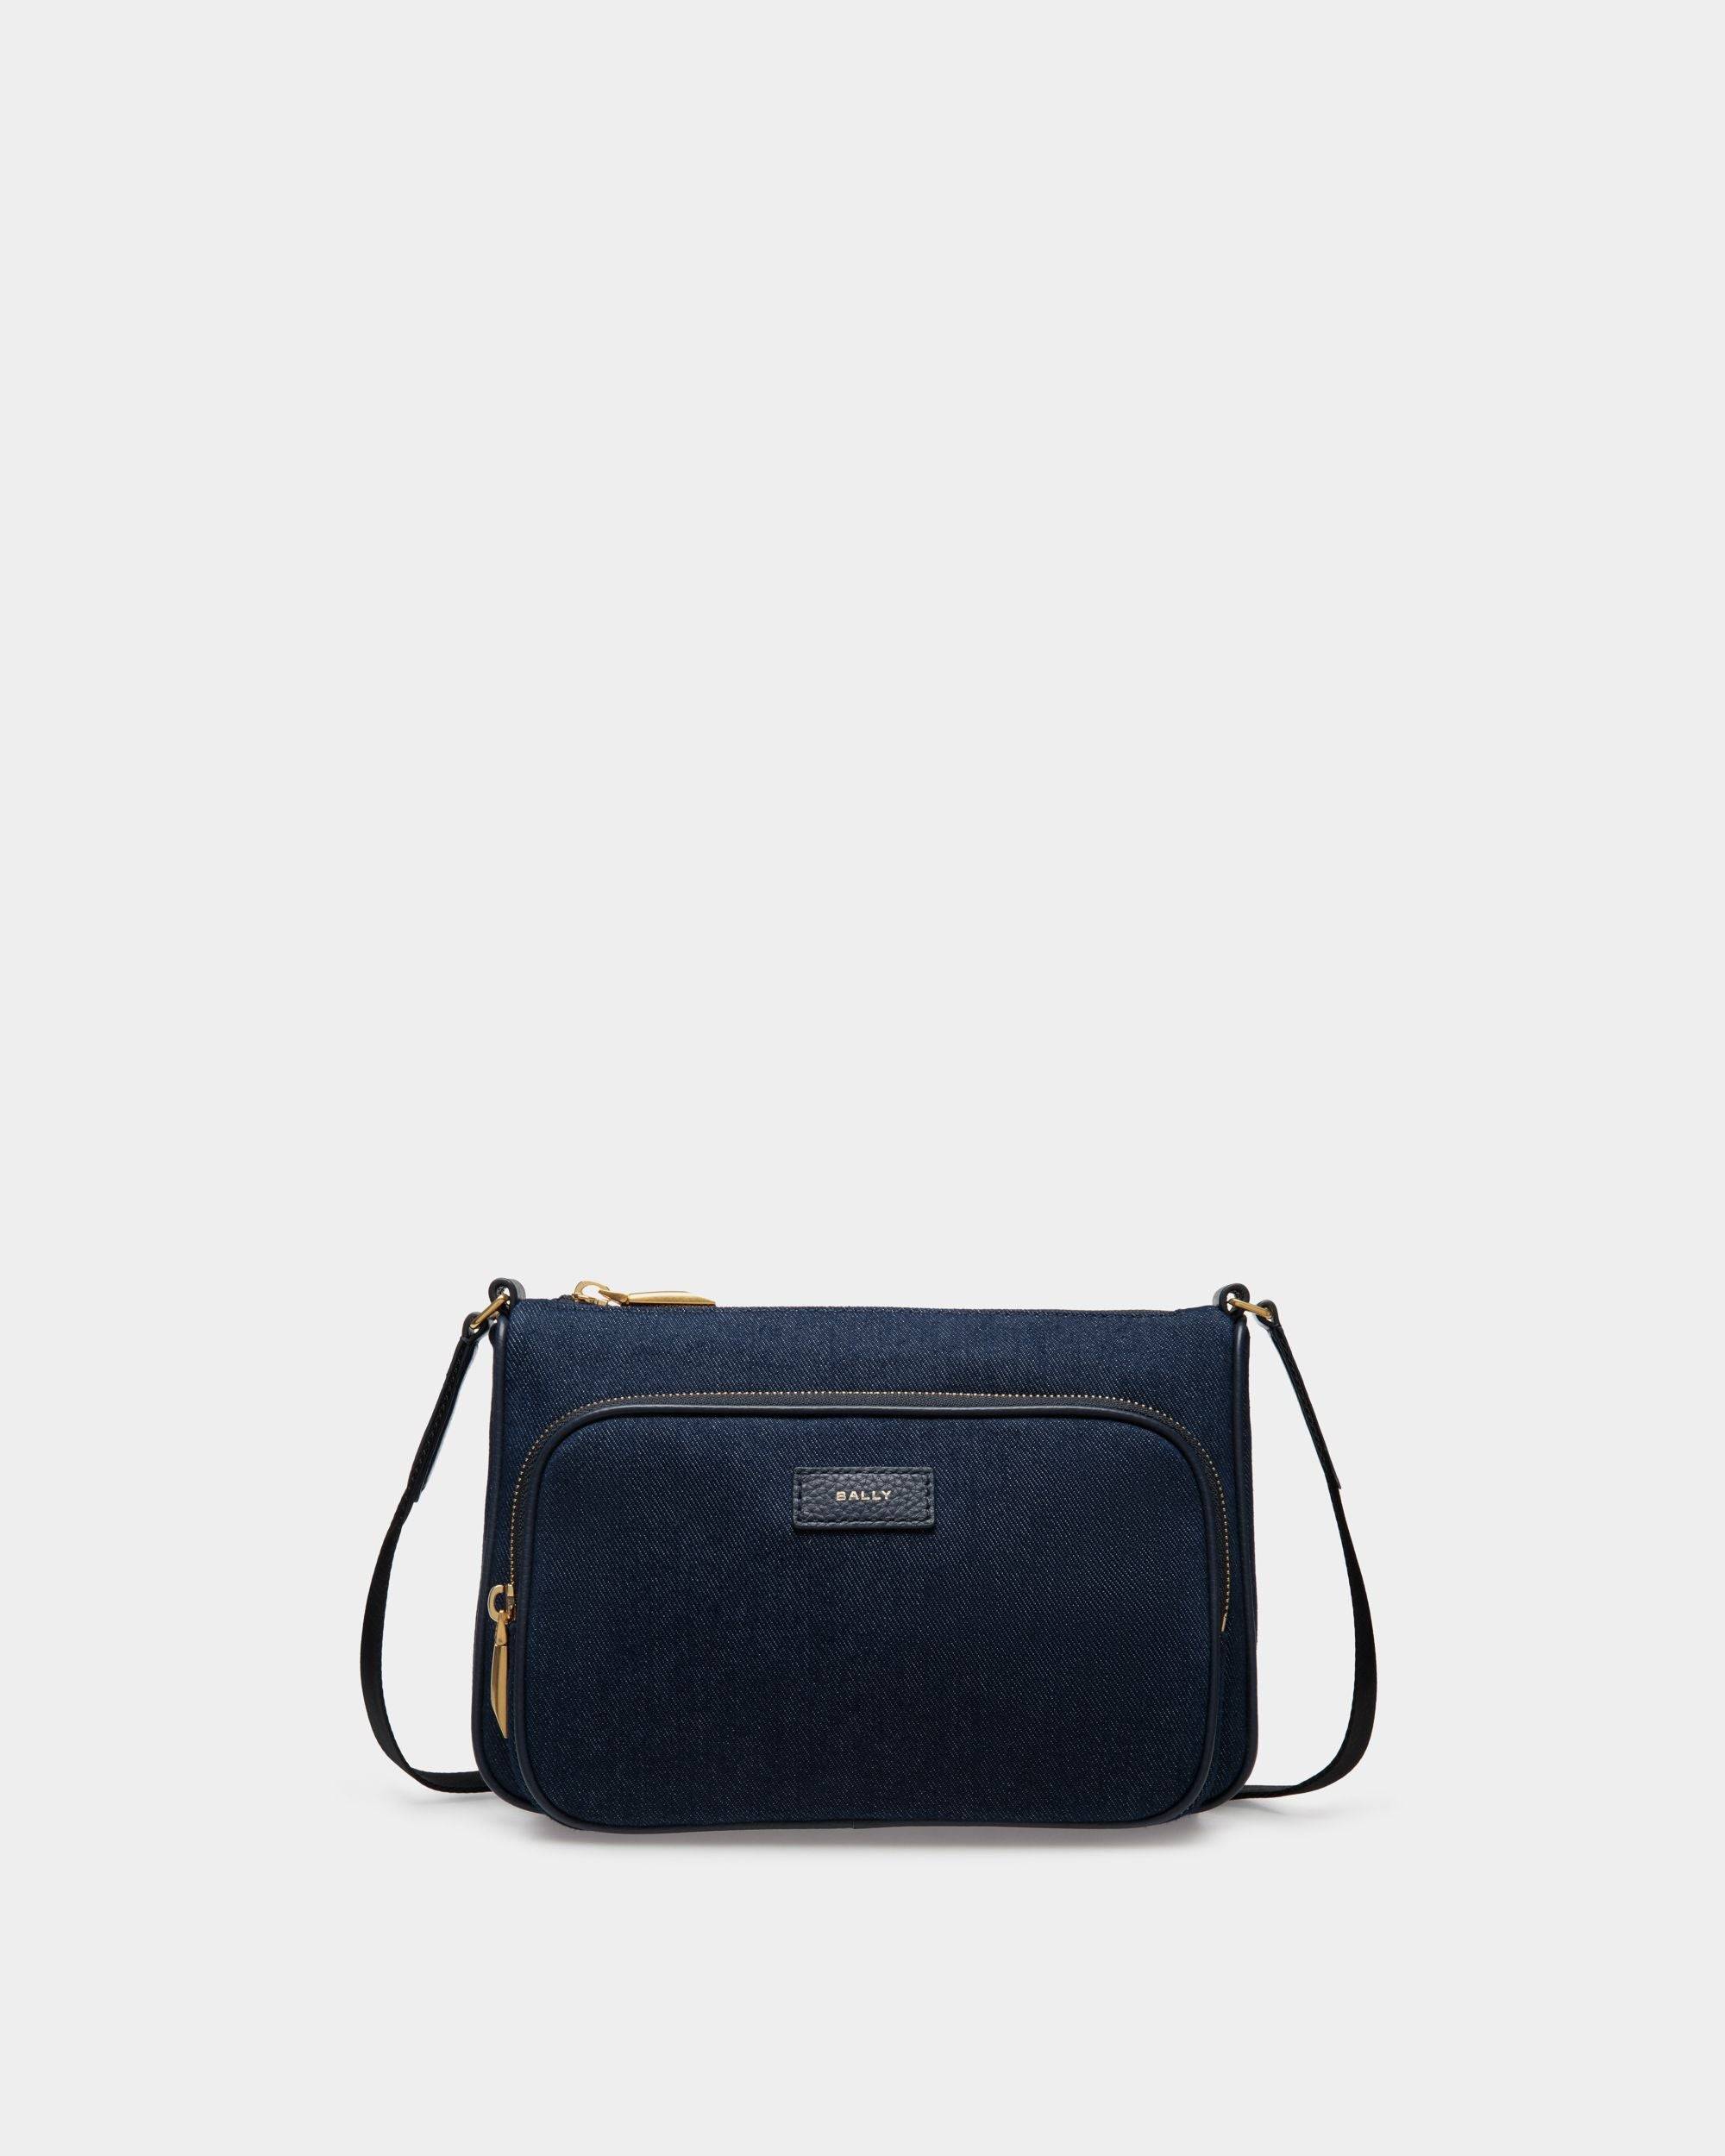 Bar | Men's Crossbody Bag in Blue Canvas And Leather | Bally | Still Life Front